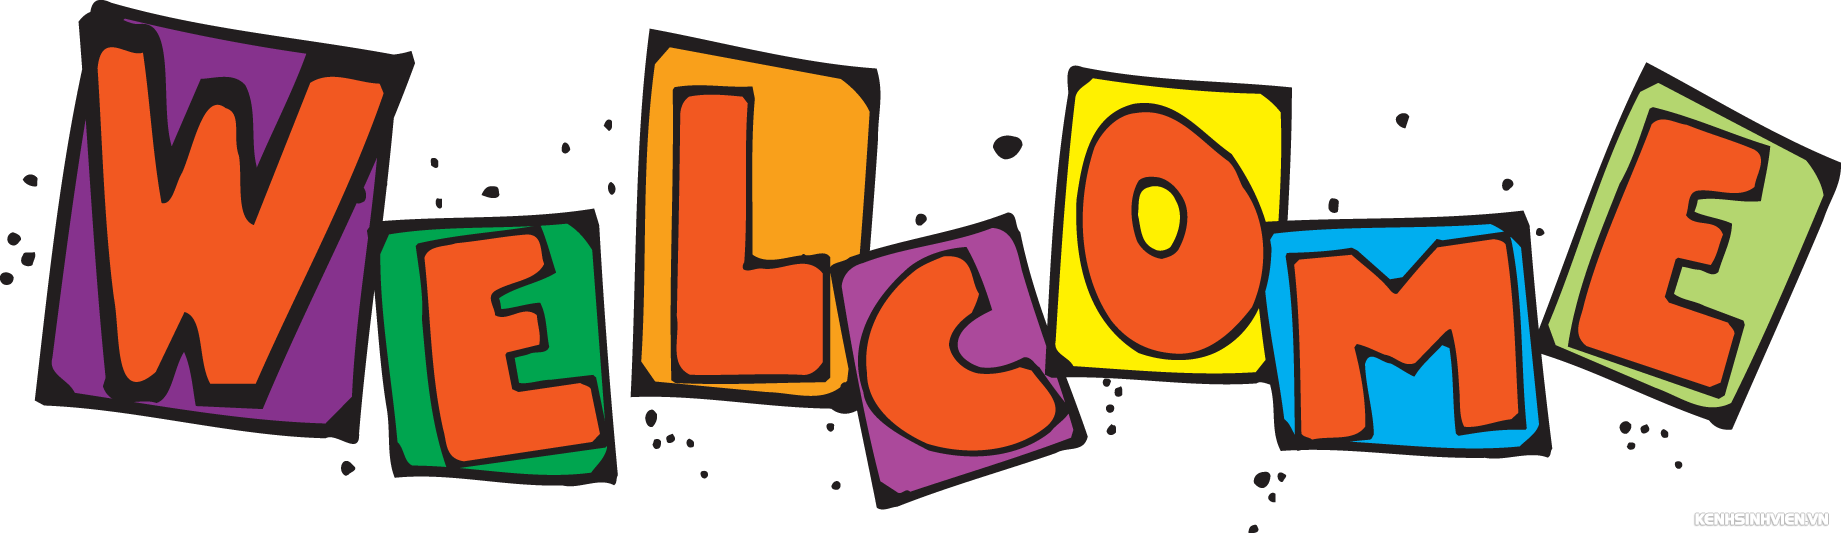 welcome-clipart-di86qp8ie.png